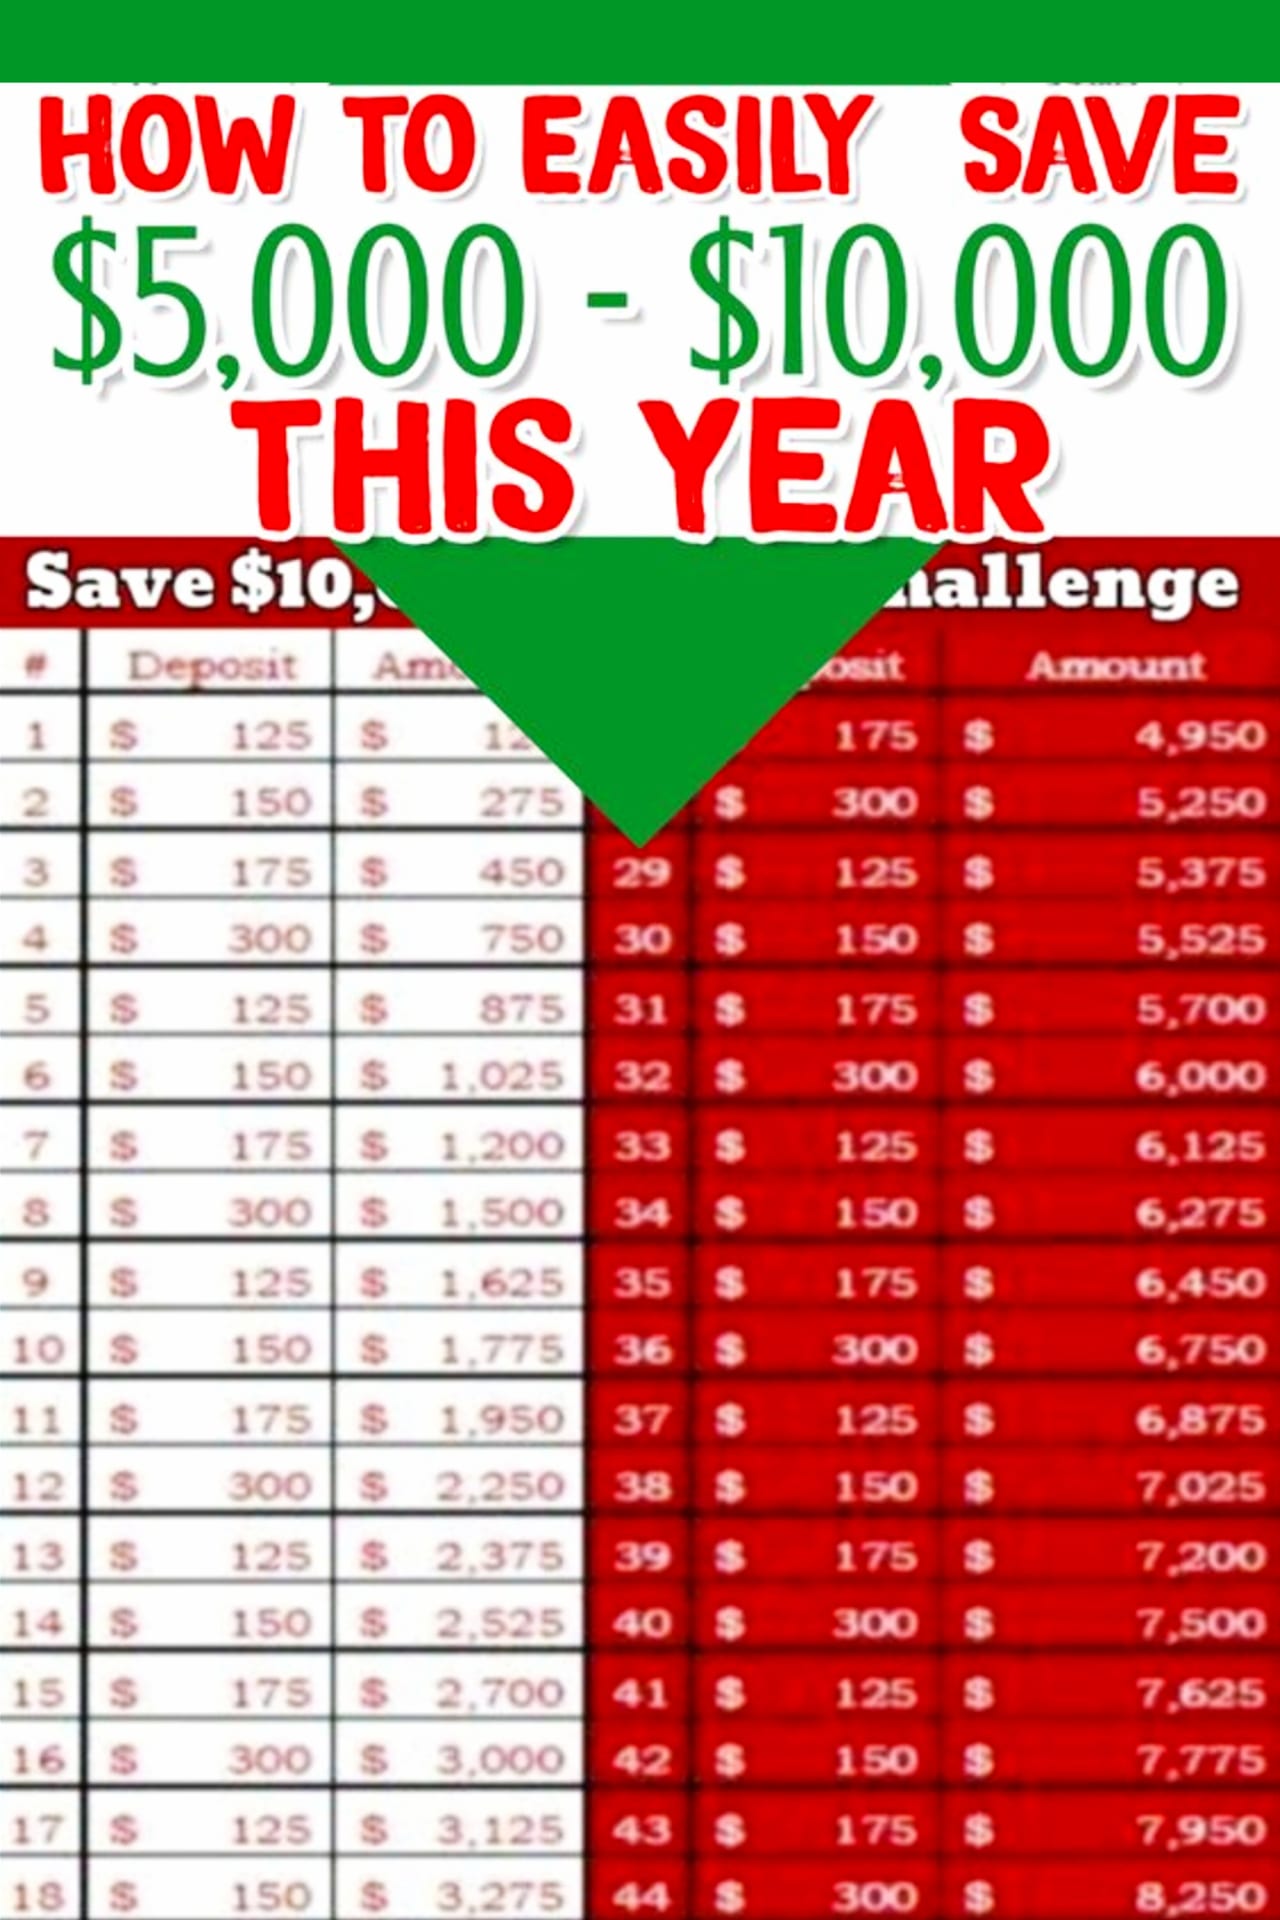 Save Money Challenges - Money Challenges Ideas - how to save $5000 to $10000 this year